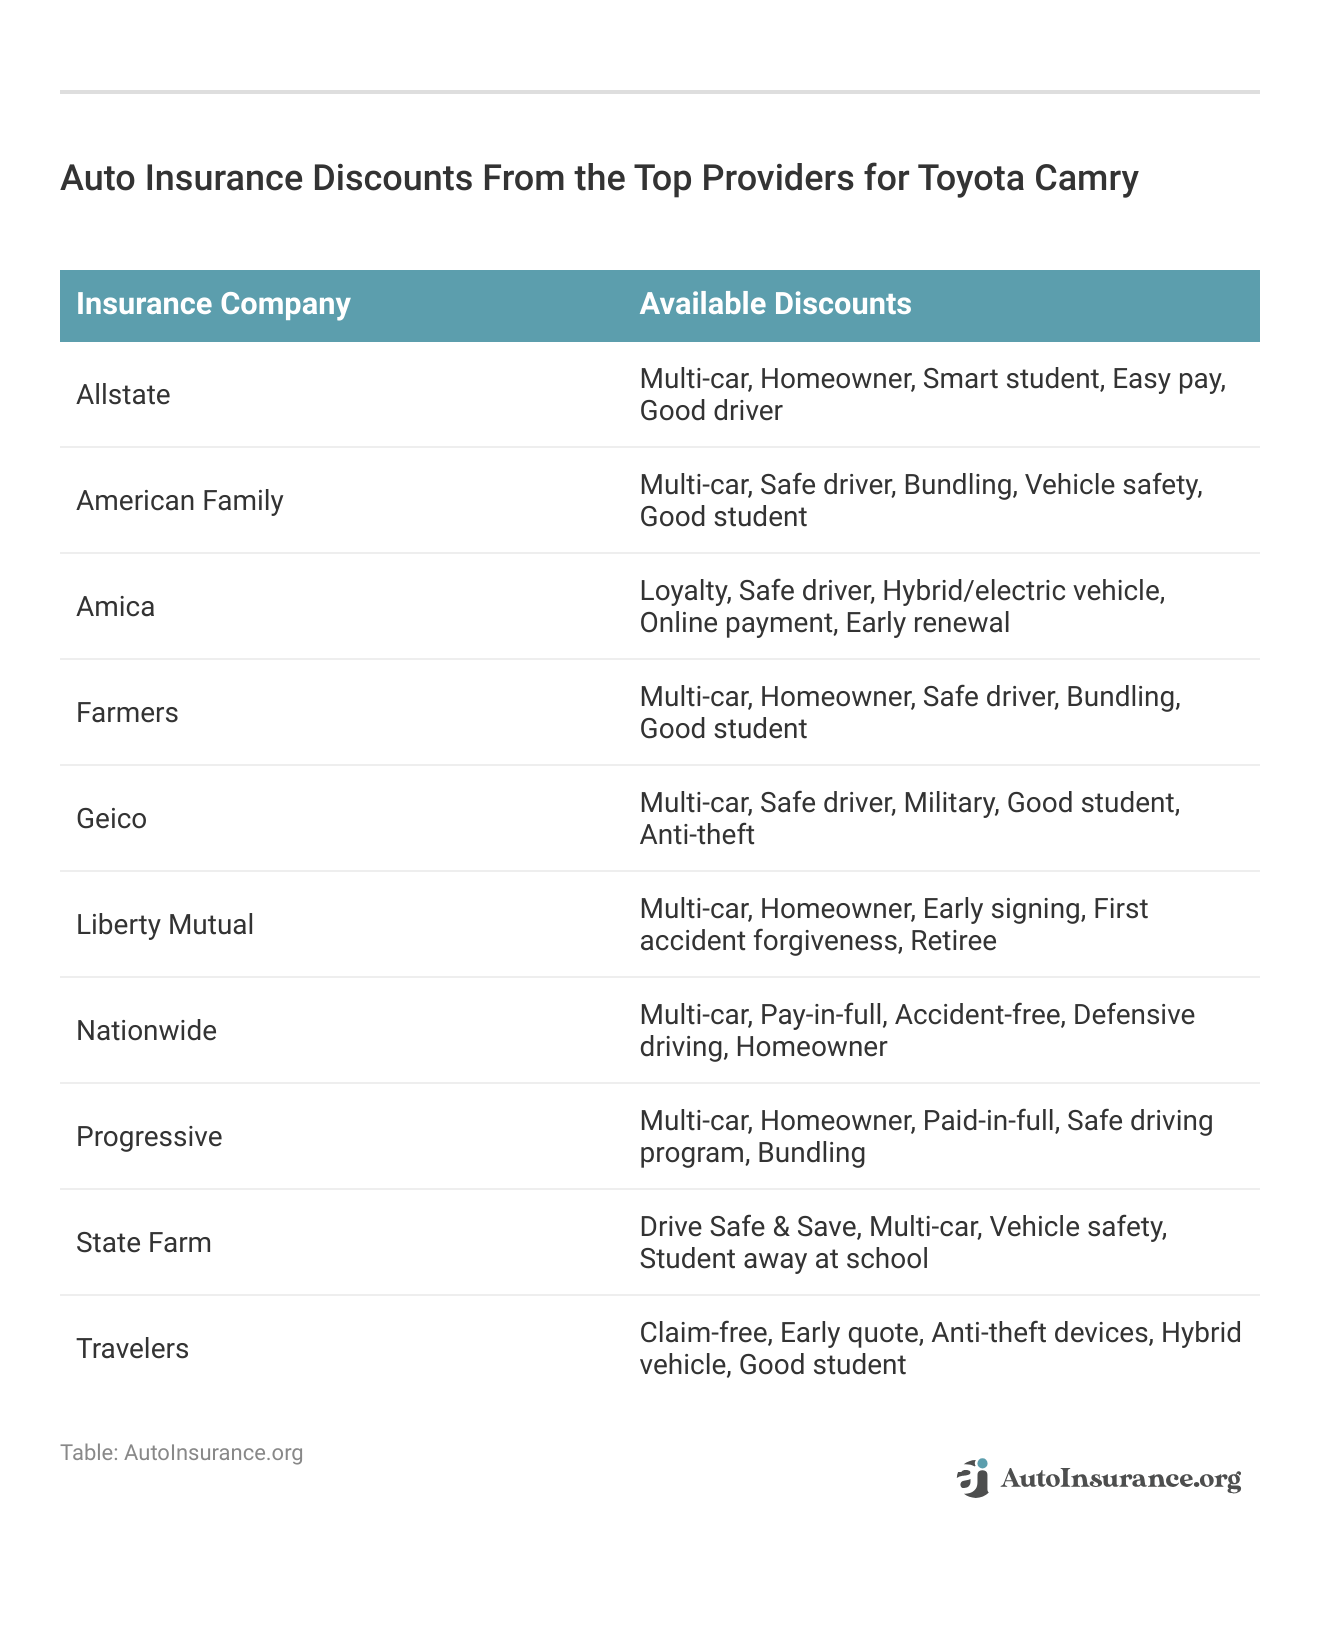 <h3>Auto Insurance Discounts From the Top Providers for Toyota Camry</h3>